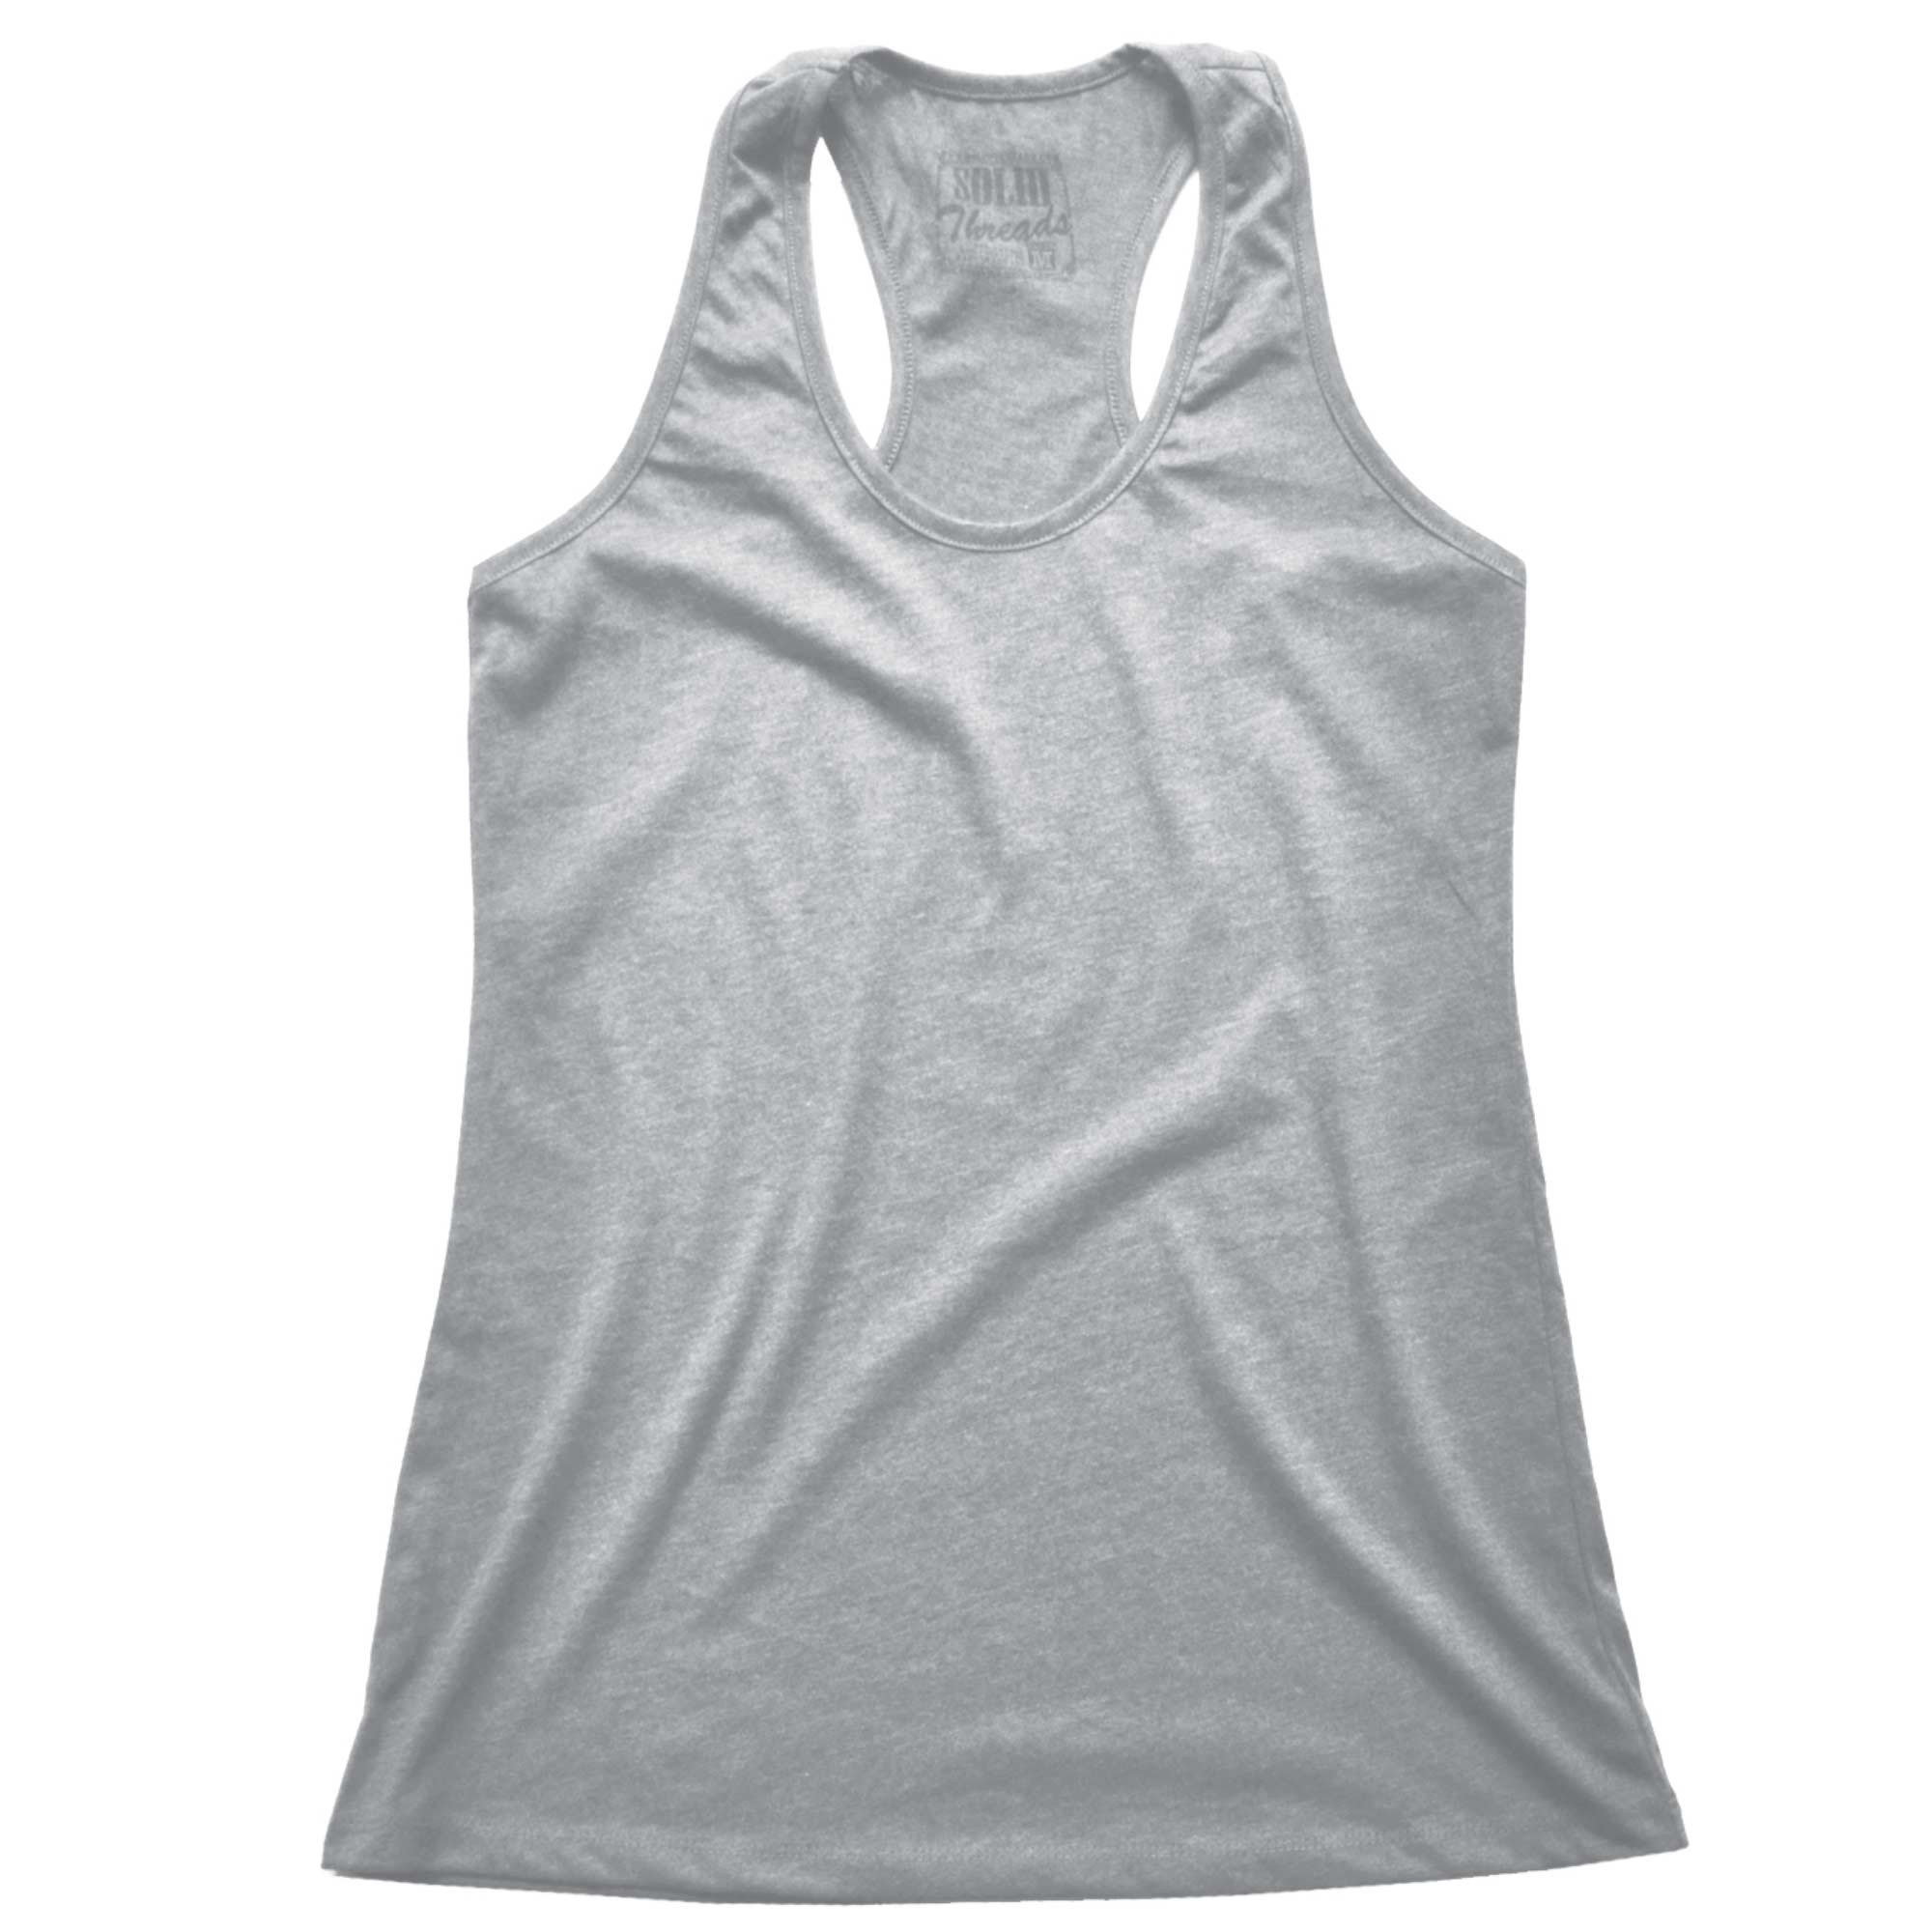 Women's Solid Threads Athletic Grey Tank Top | Vintage Inspired USA Made Tee